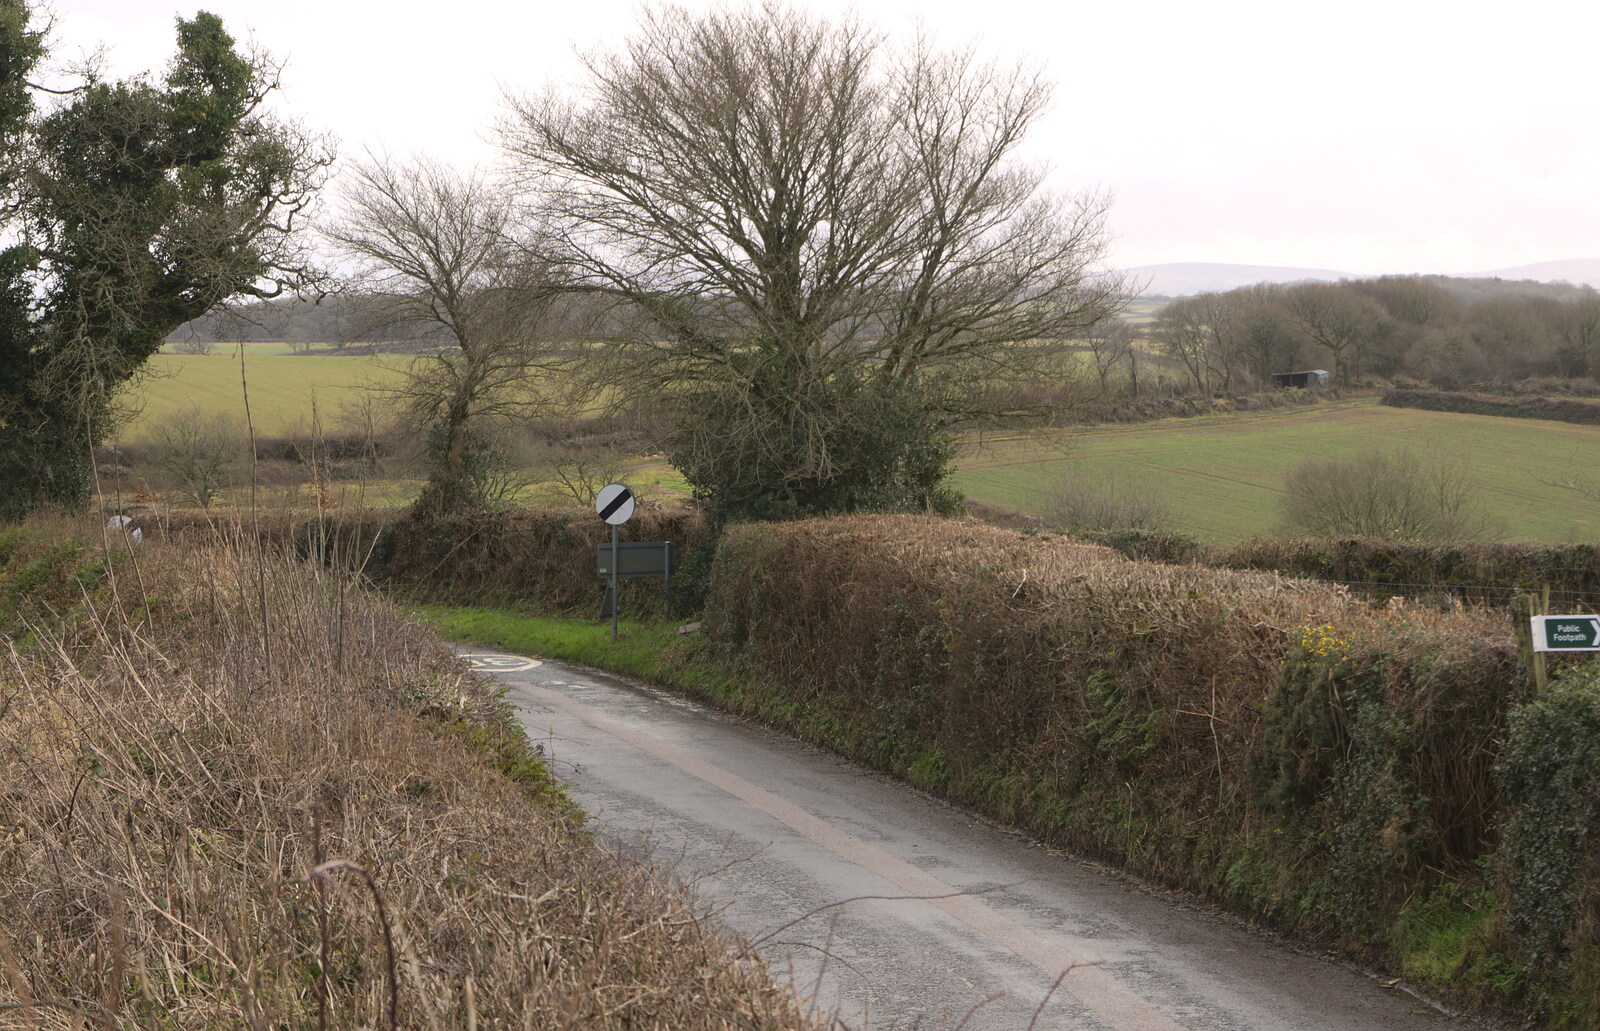 The road to Whiddon Down from A Trip to Grandma J's, Spreyton, Devon - 18th February 2015